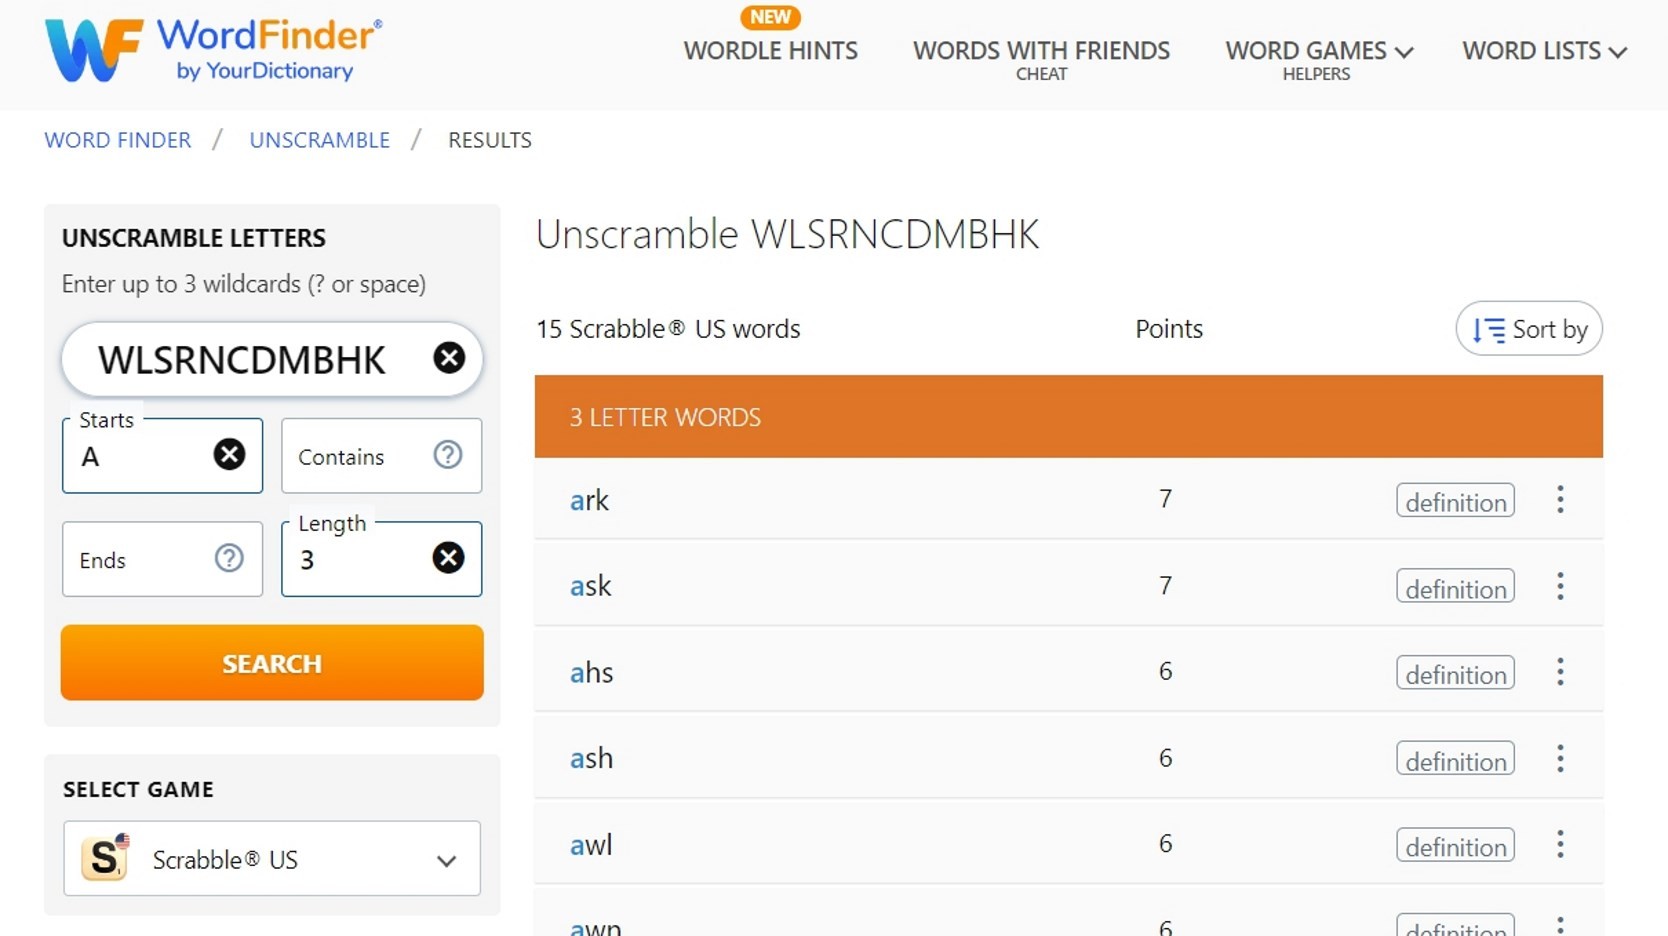 Unscramble letters with WordFinder by YourDictionary